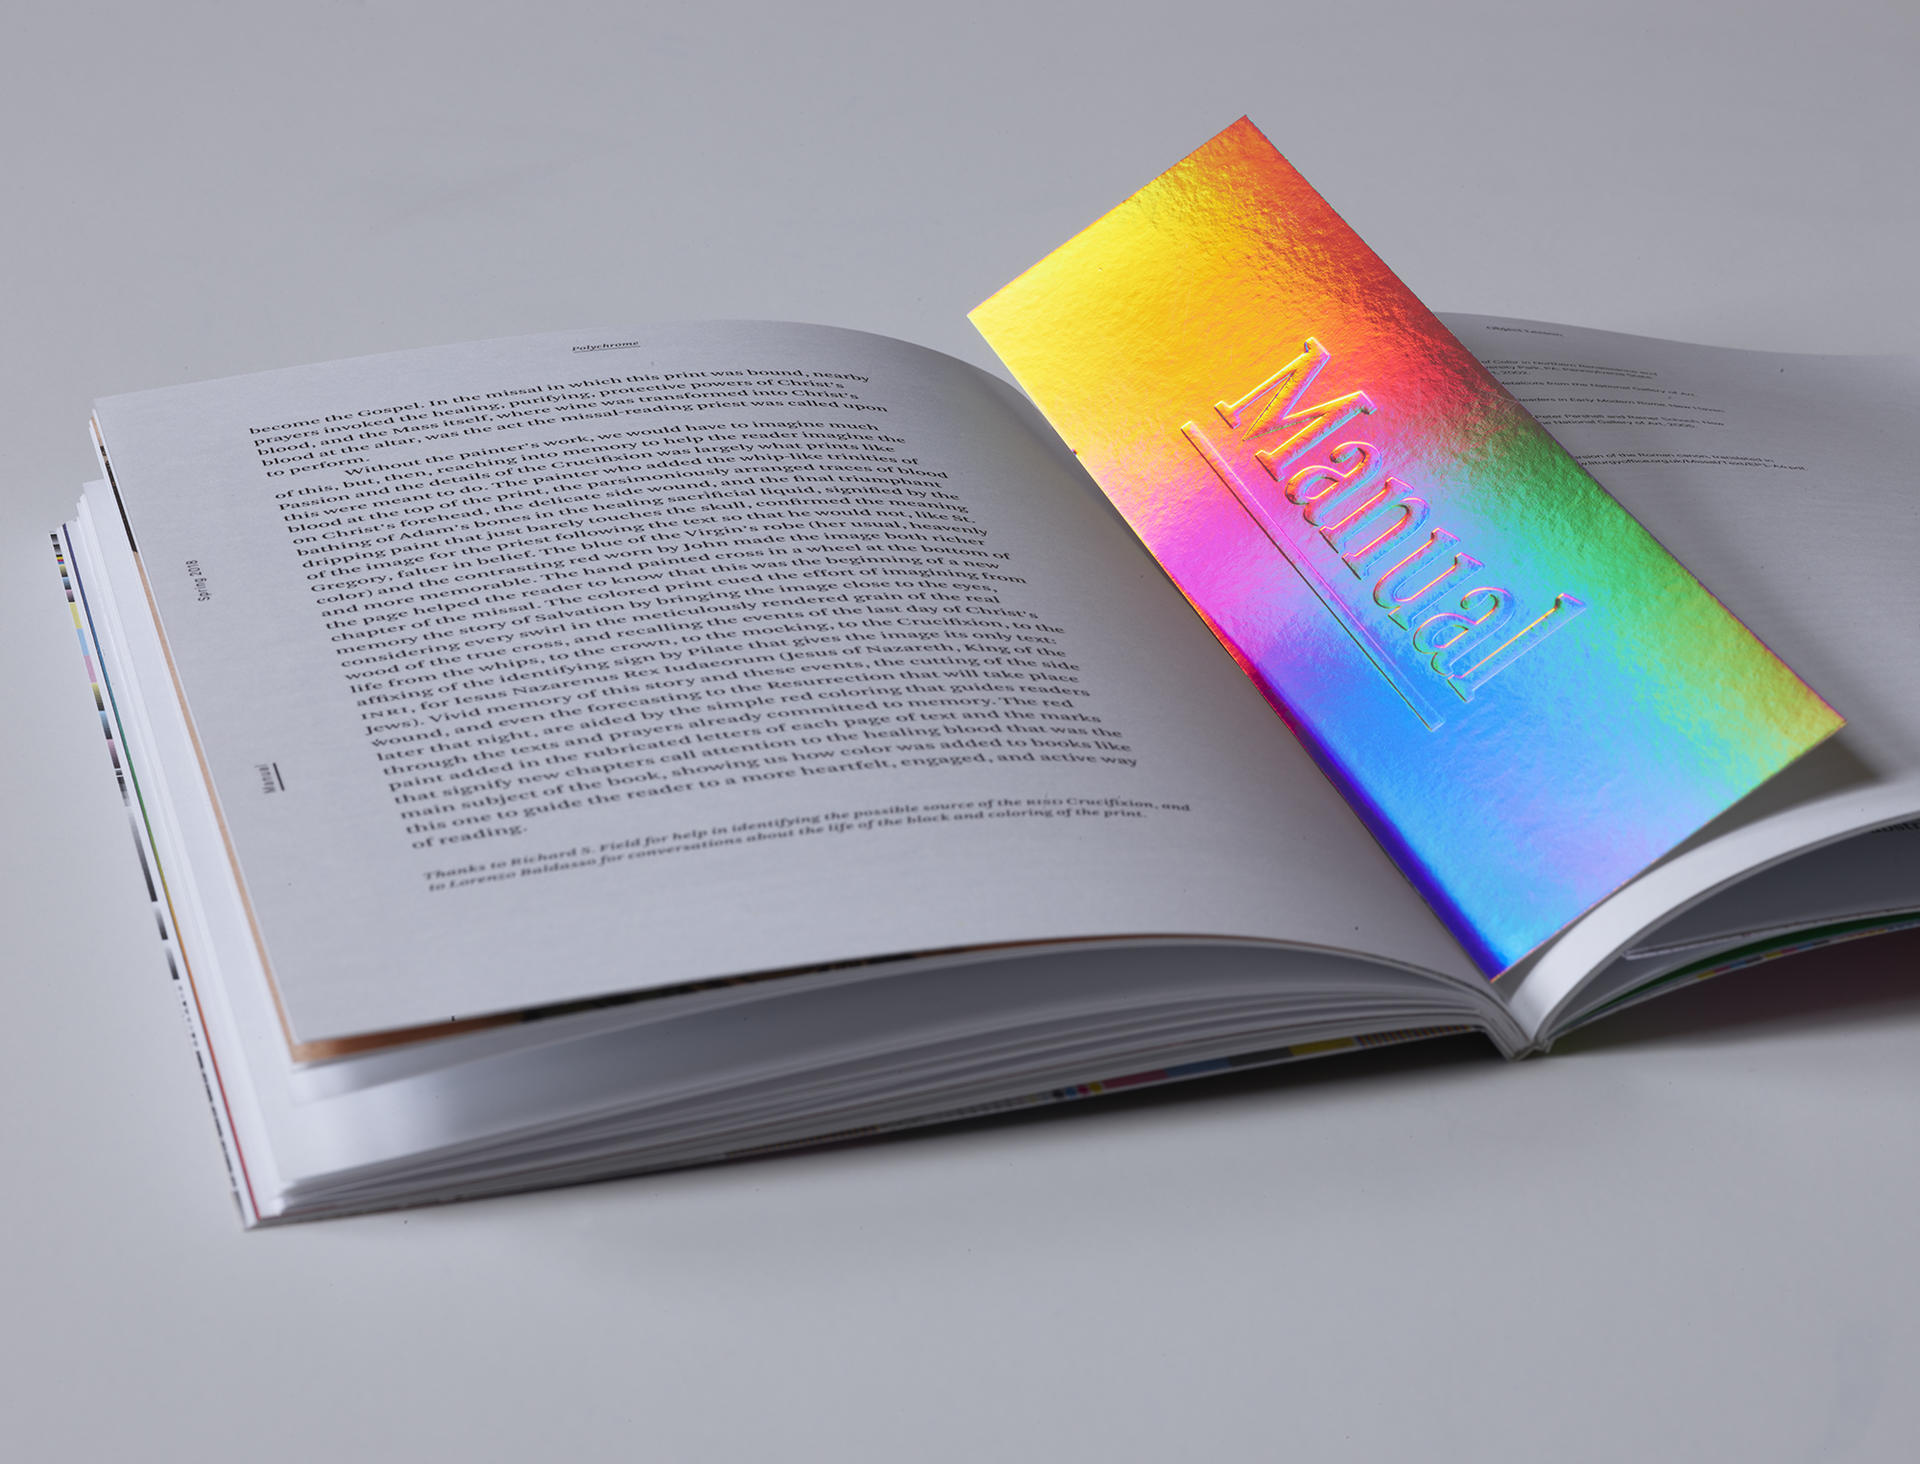 A publication lies open on a white surface. Resting in the middle of the page is a rainbow-colored bookmark, the word “Manual” stamped onto it.